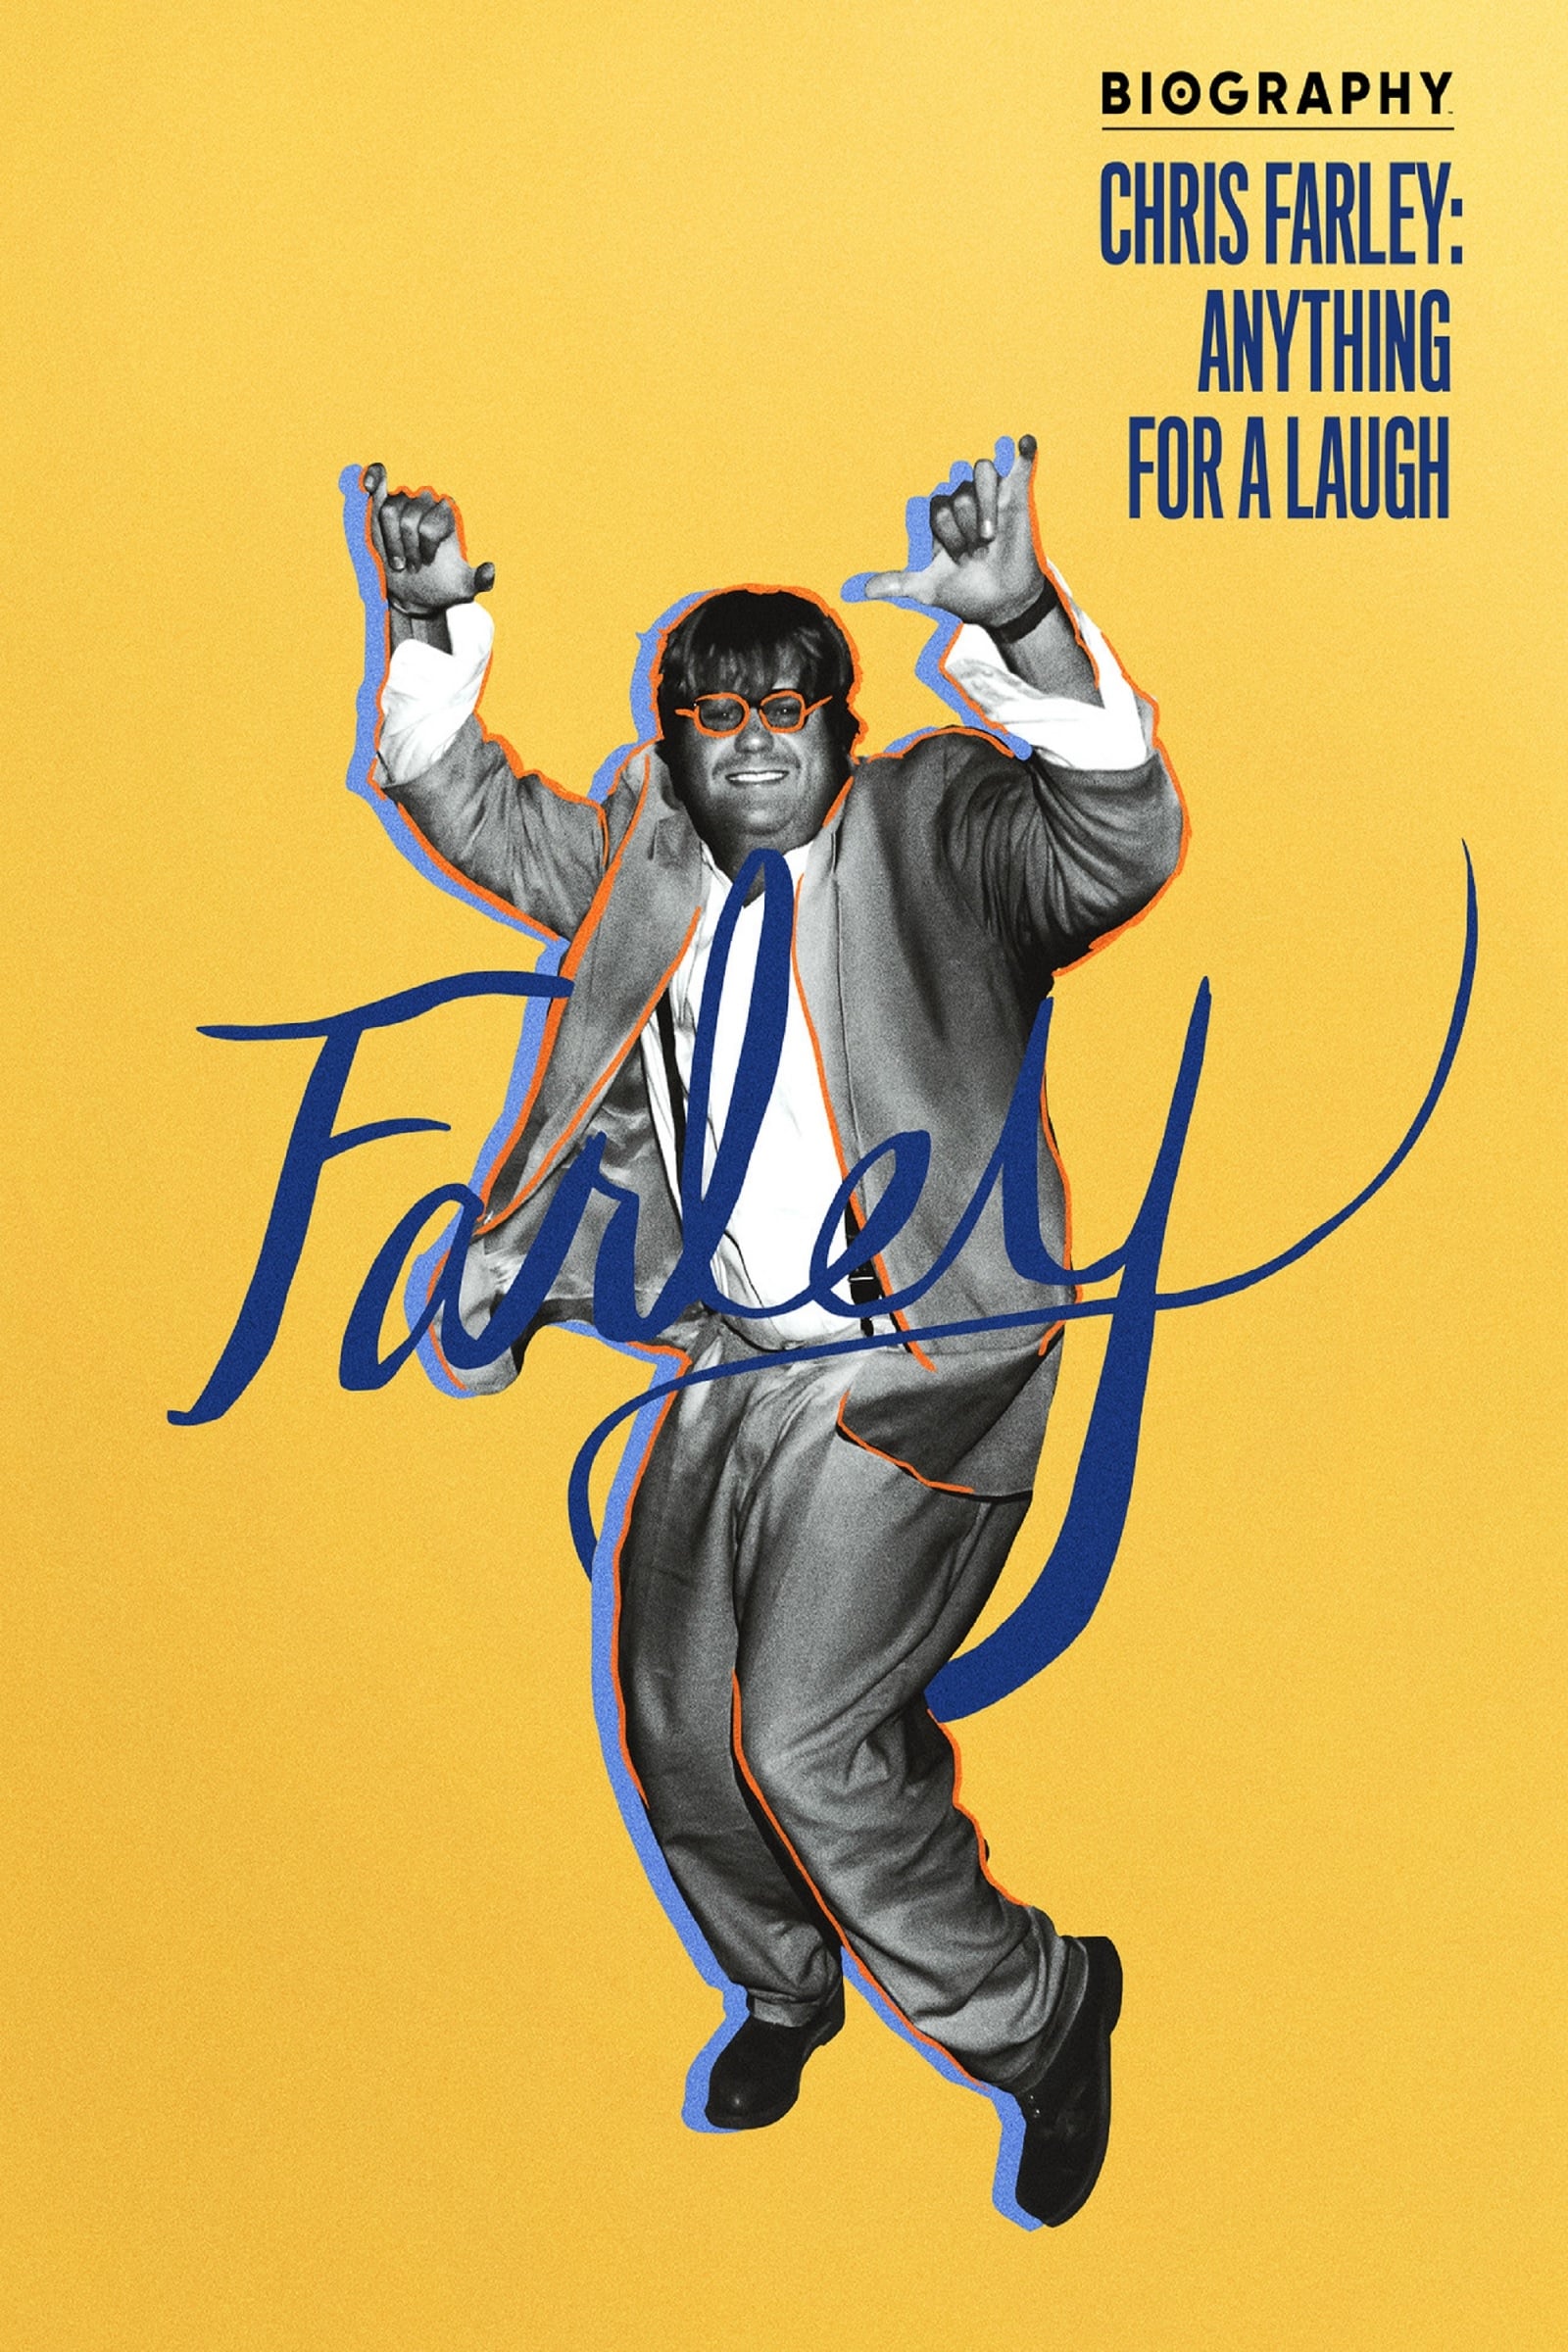 Chris Farley: Anything for a Laugh (2019)